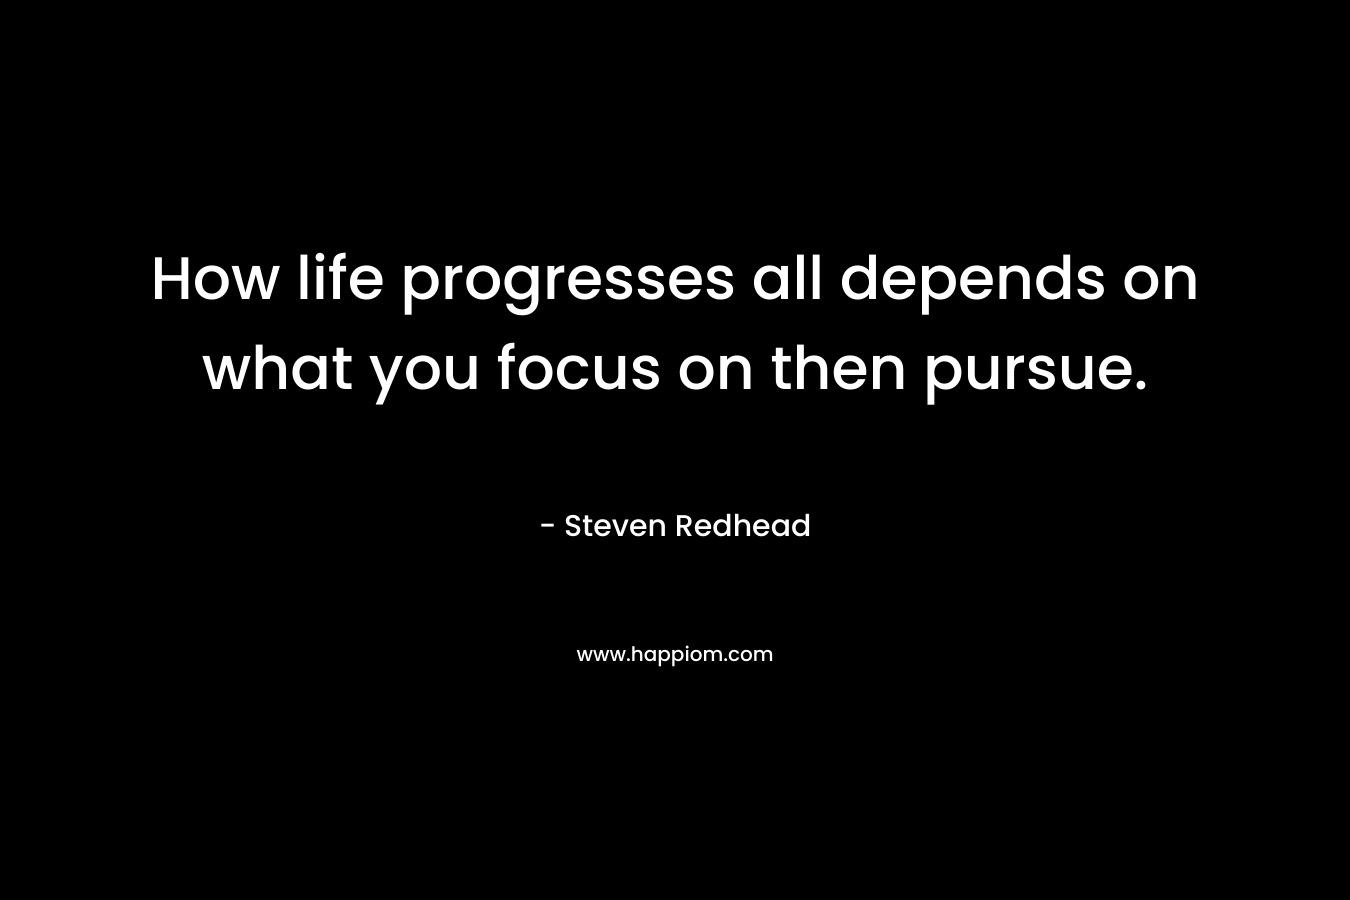 How life progresses all depends on what you focus on then pursue.